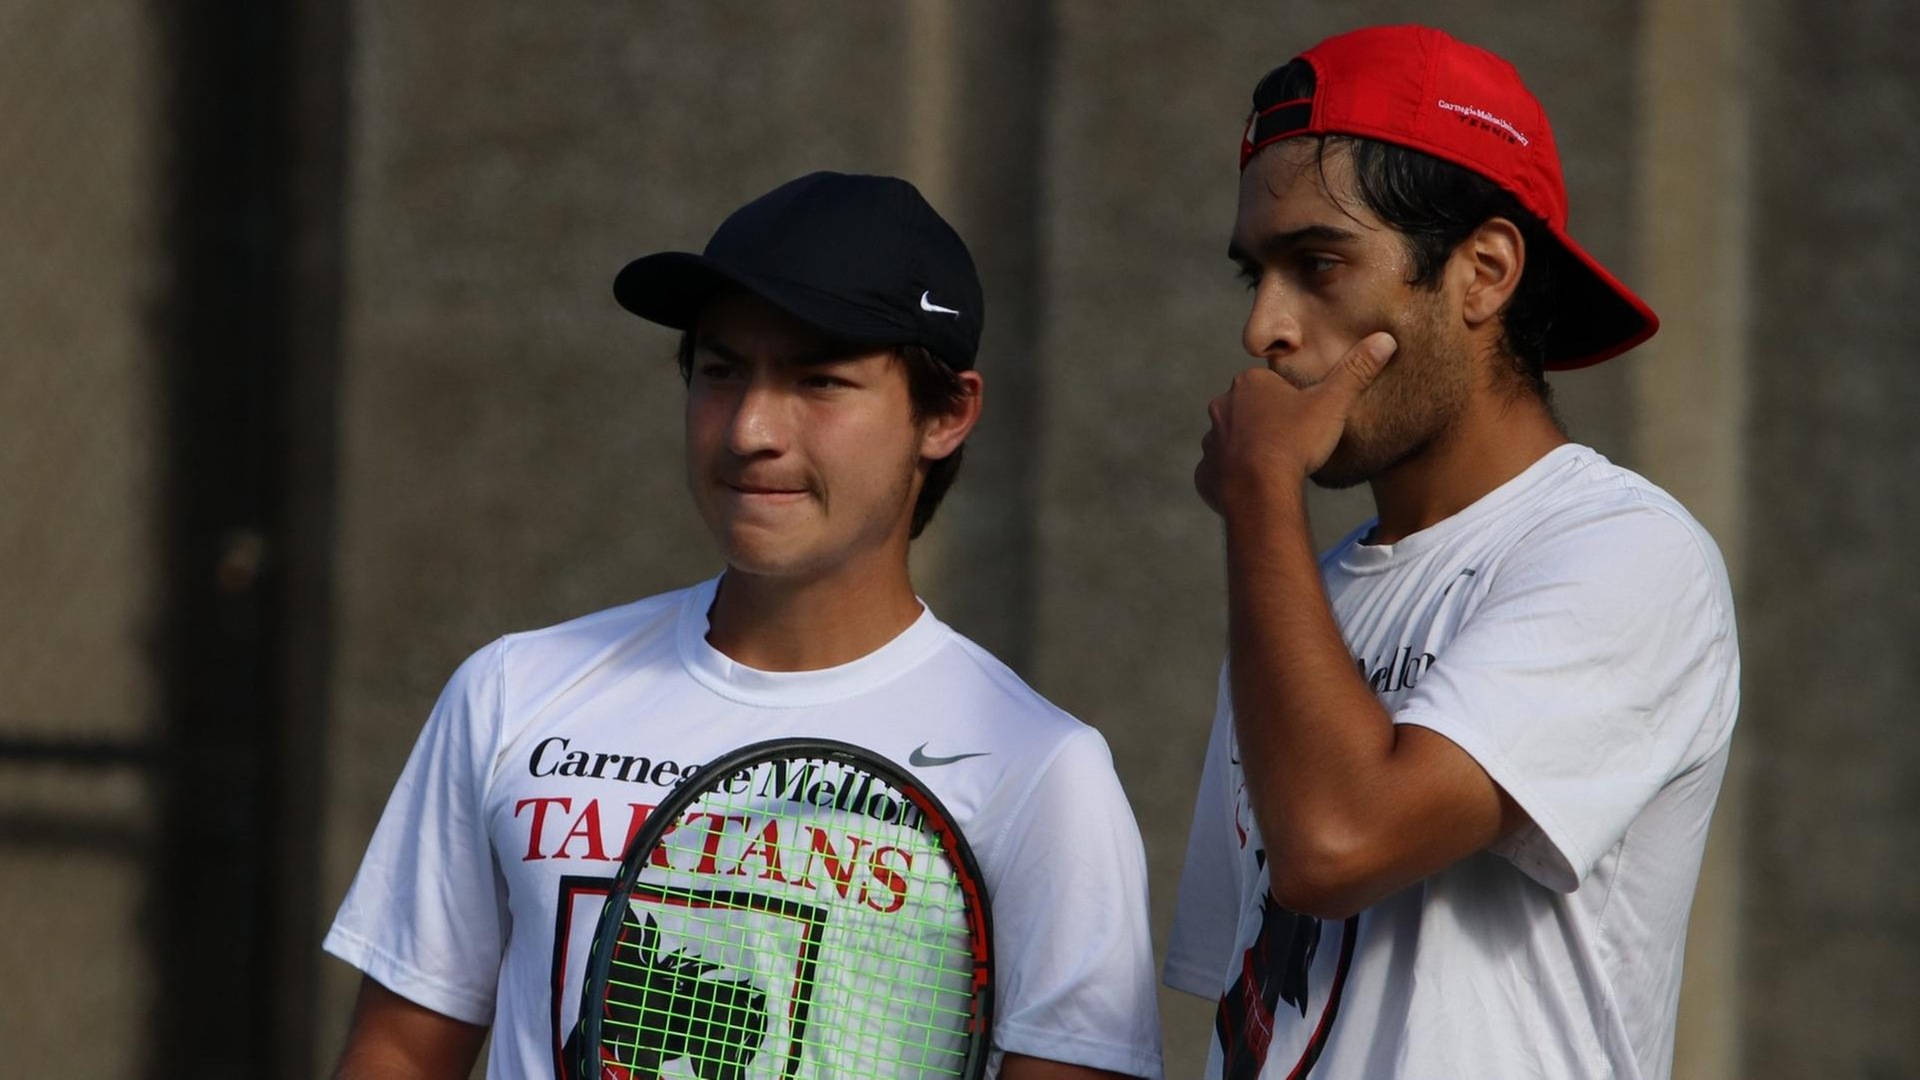 two men's tennis players wearing white shirts talking before a play